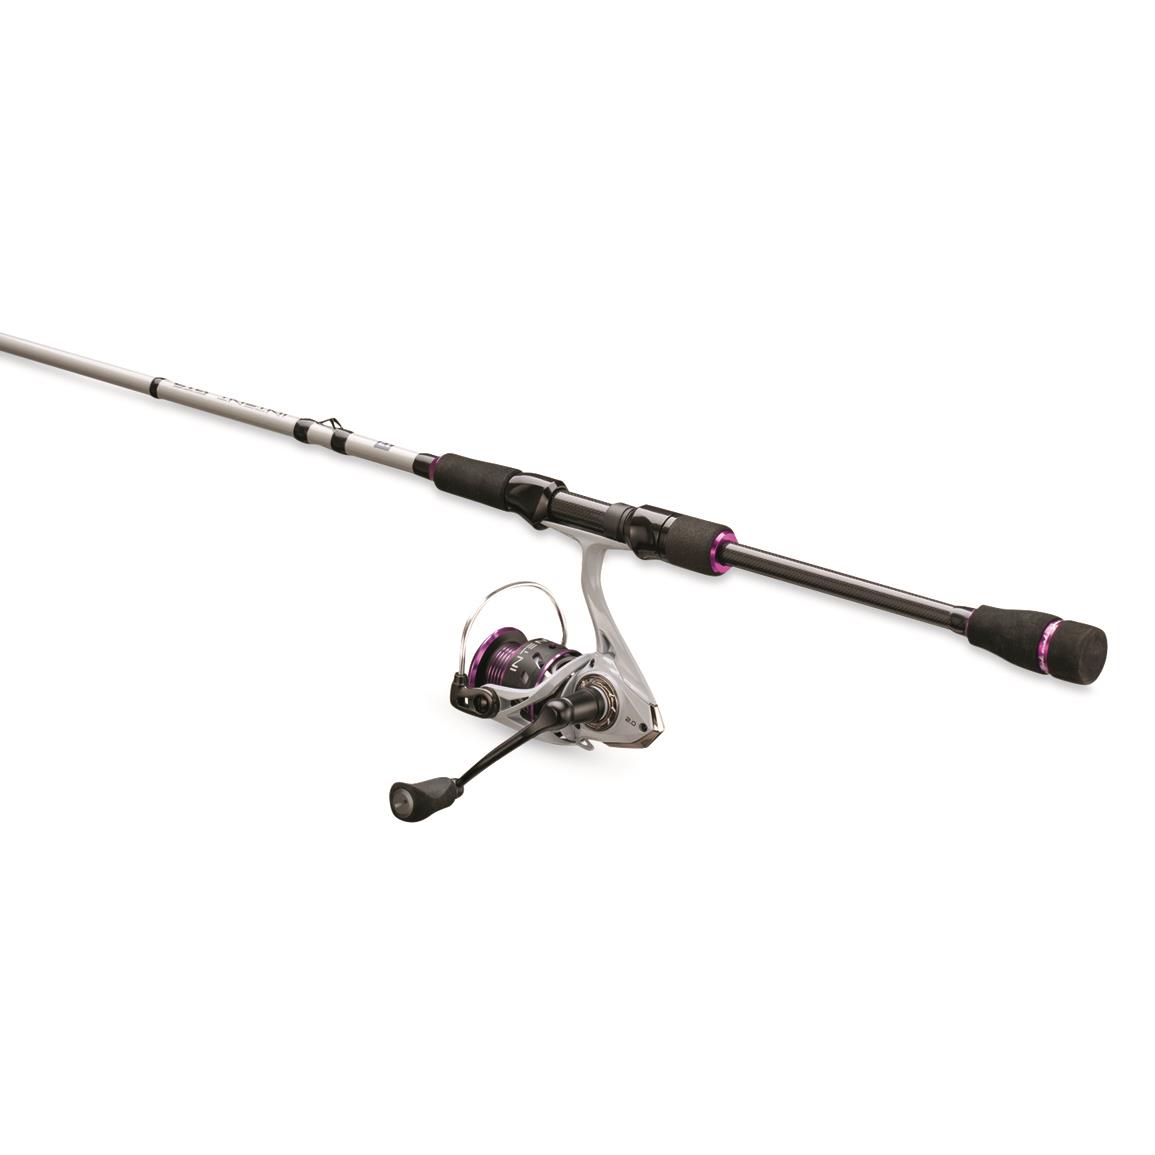 Zebco Crappie Fighter Spinning Rod & Reel Fishing Combo 12 Ft Ball Bearing  Drive